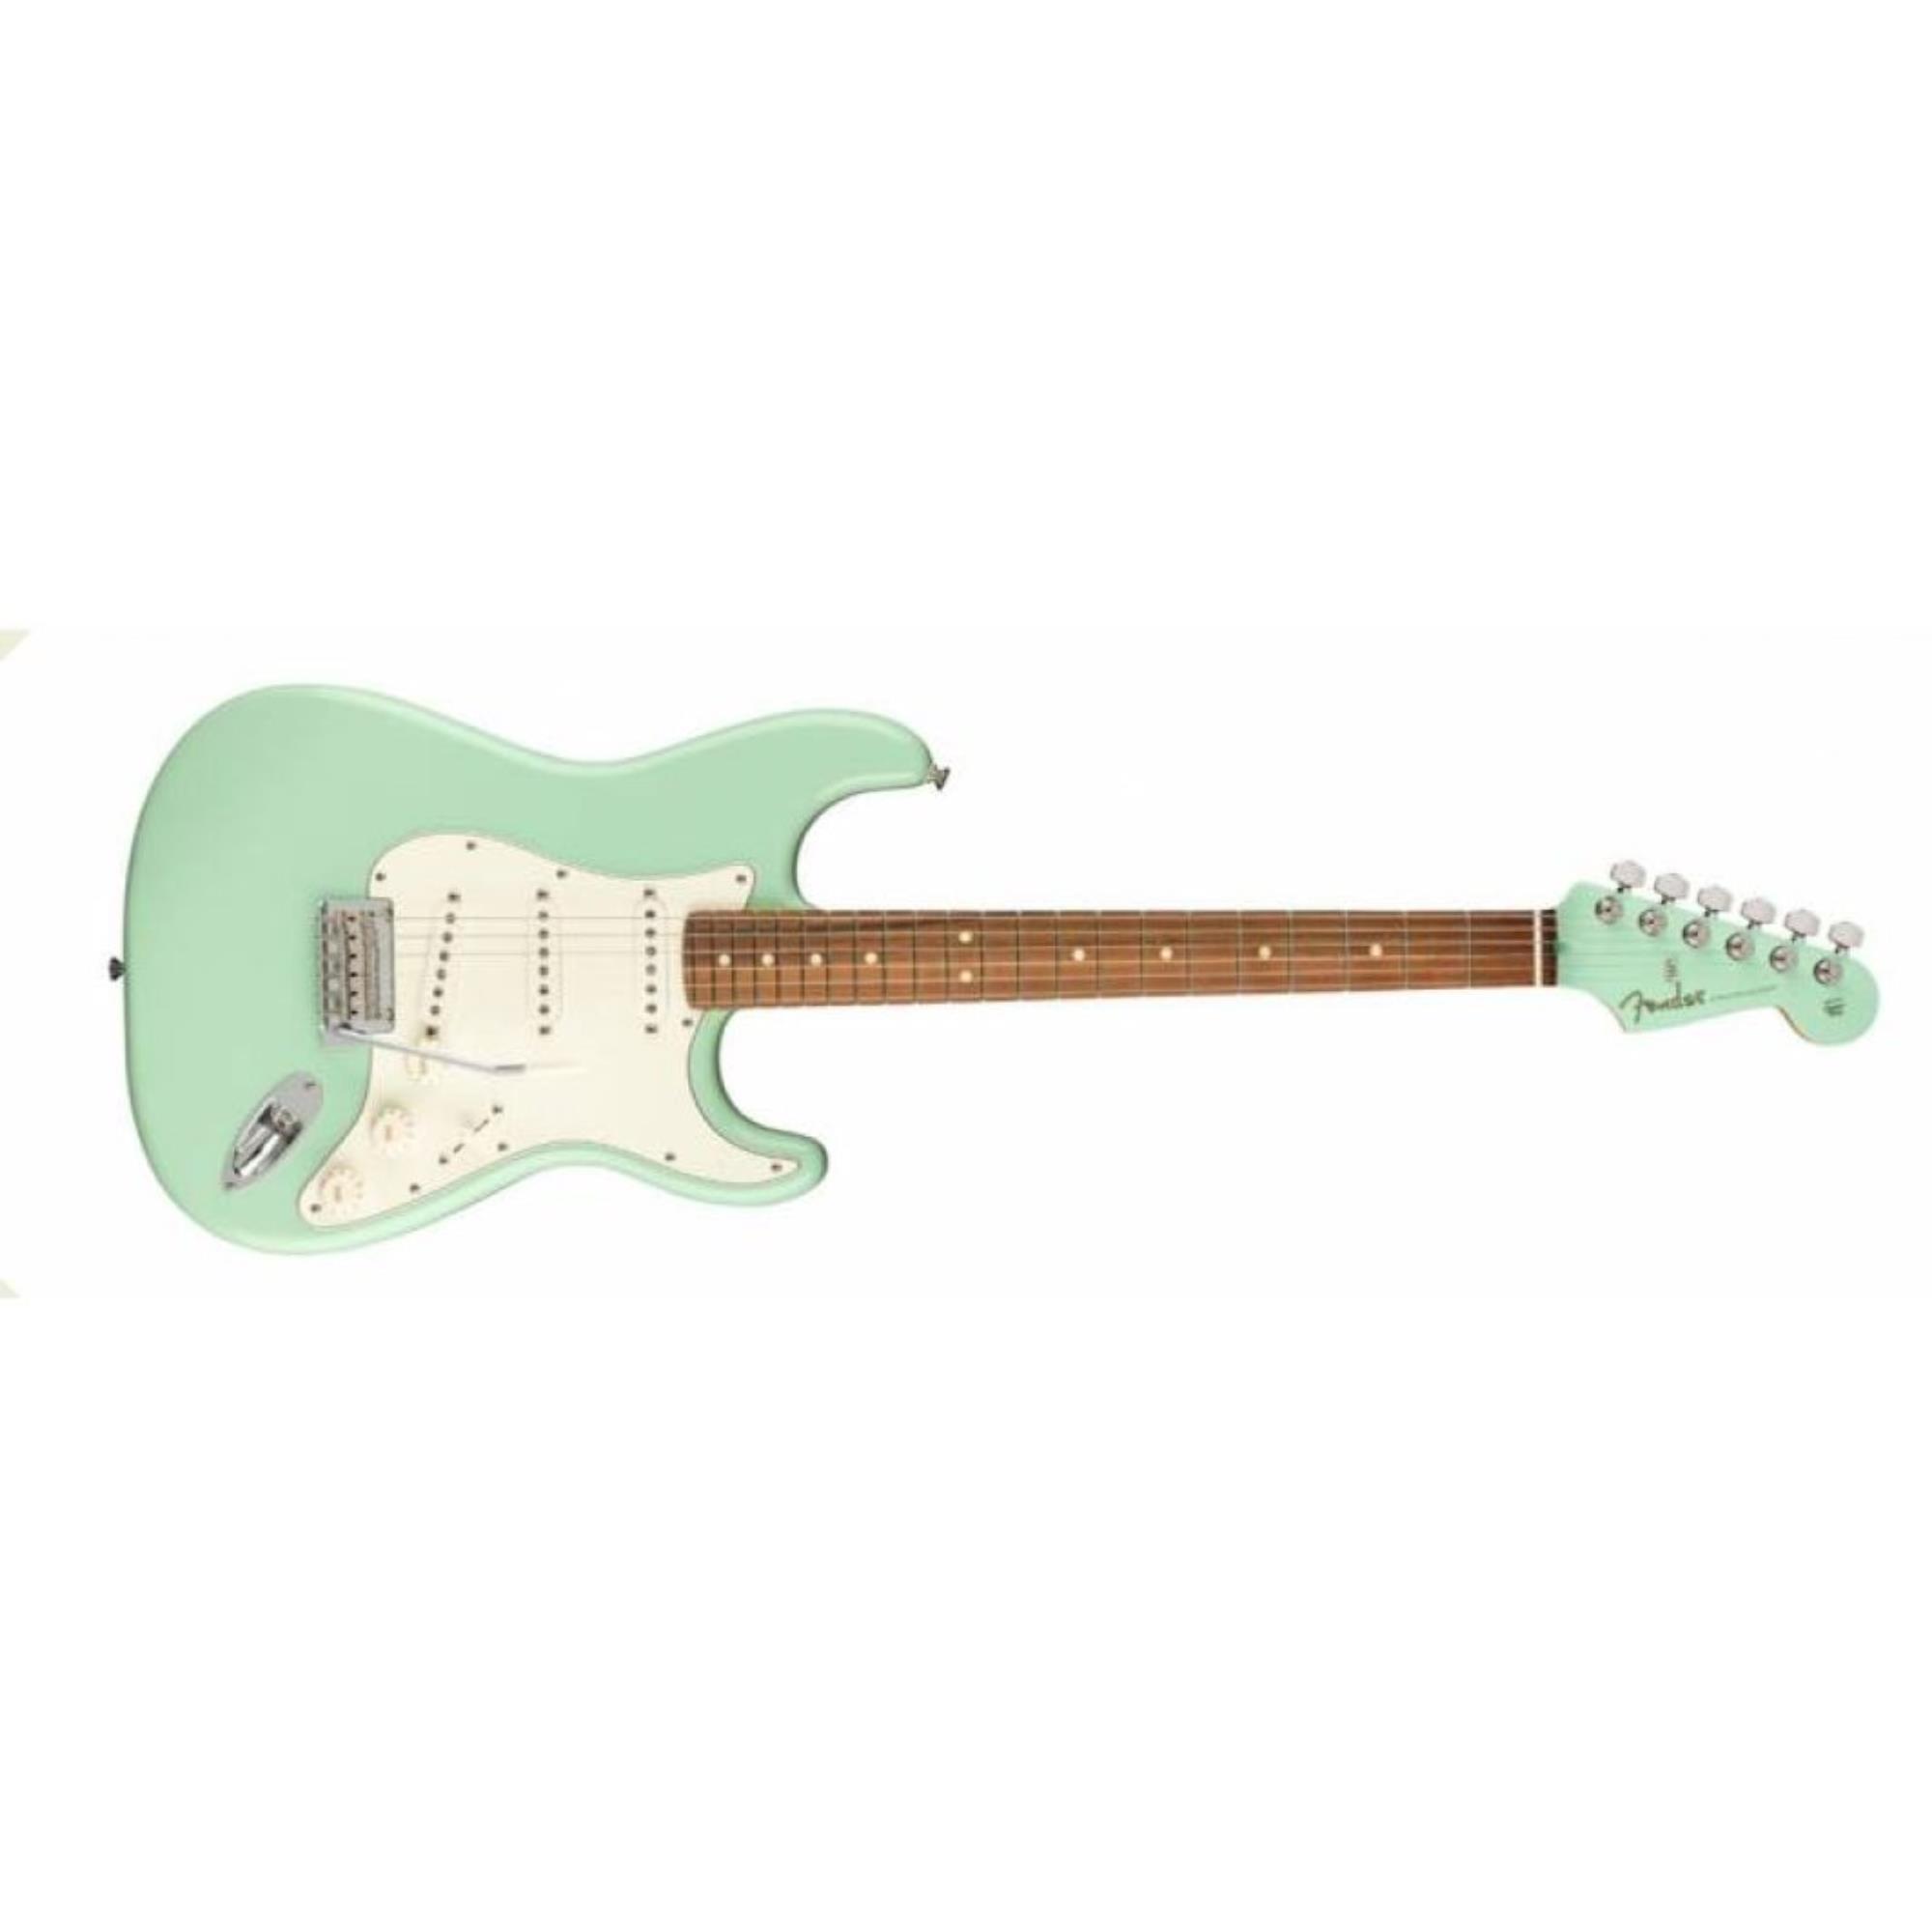 FENDER-DE-Limited-Edition-Player-Stratocaster-Surf-Green-Matching-Headstock-0144503557-sku-25058